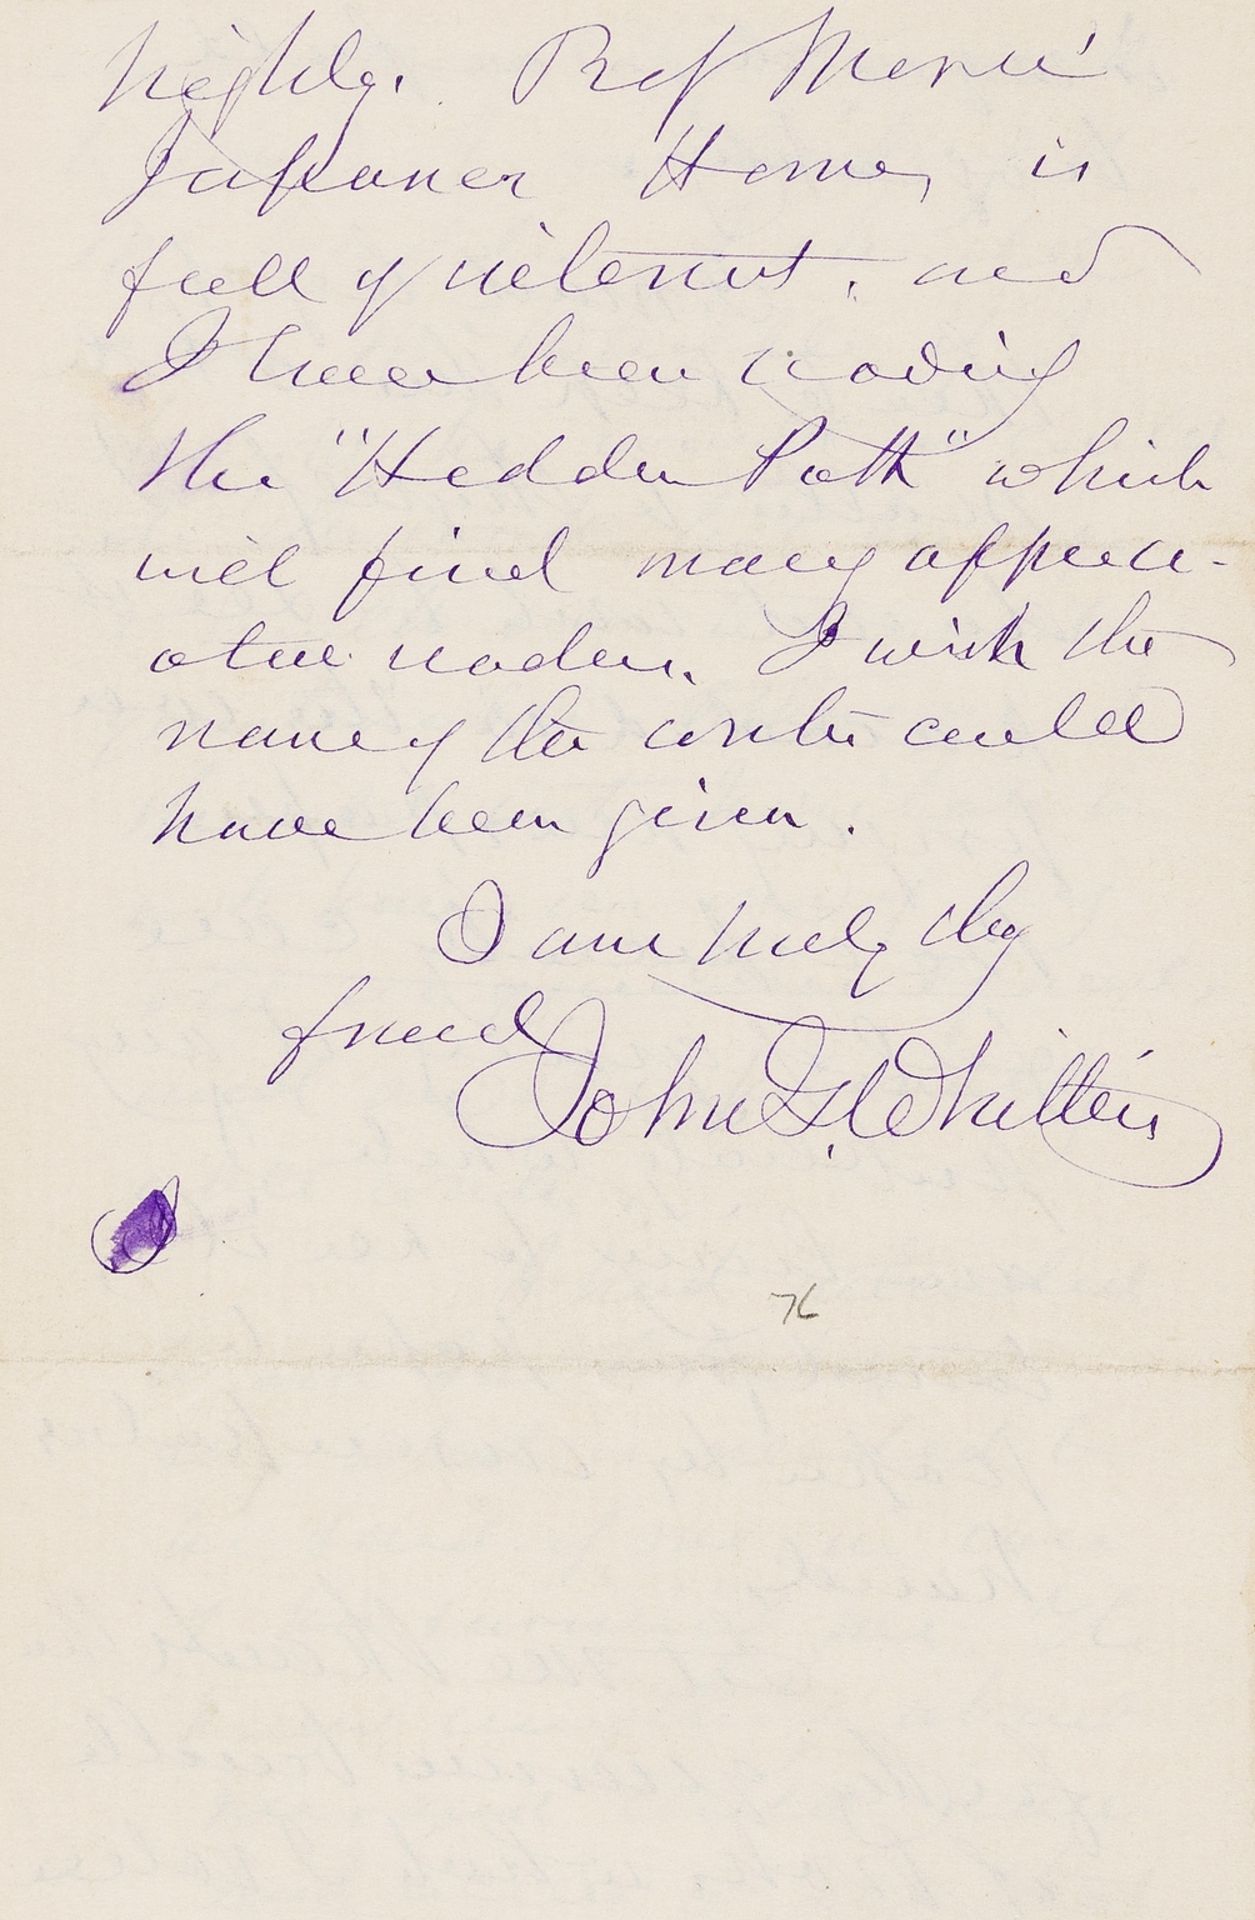 Whittier (John Greenleaf) 2 Autograph Letters signed to "Dear Sir" and Benjamin Holt Ticknor, 1860 …